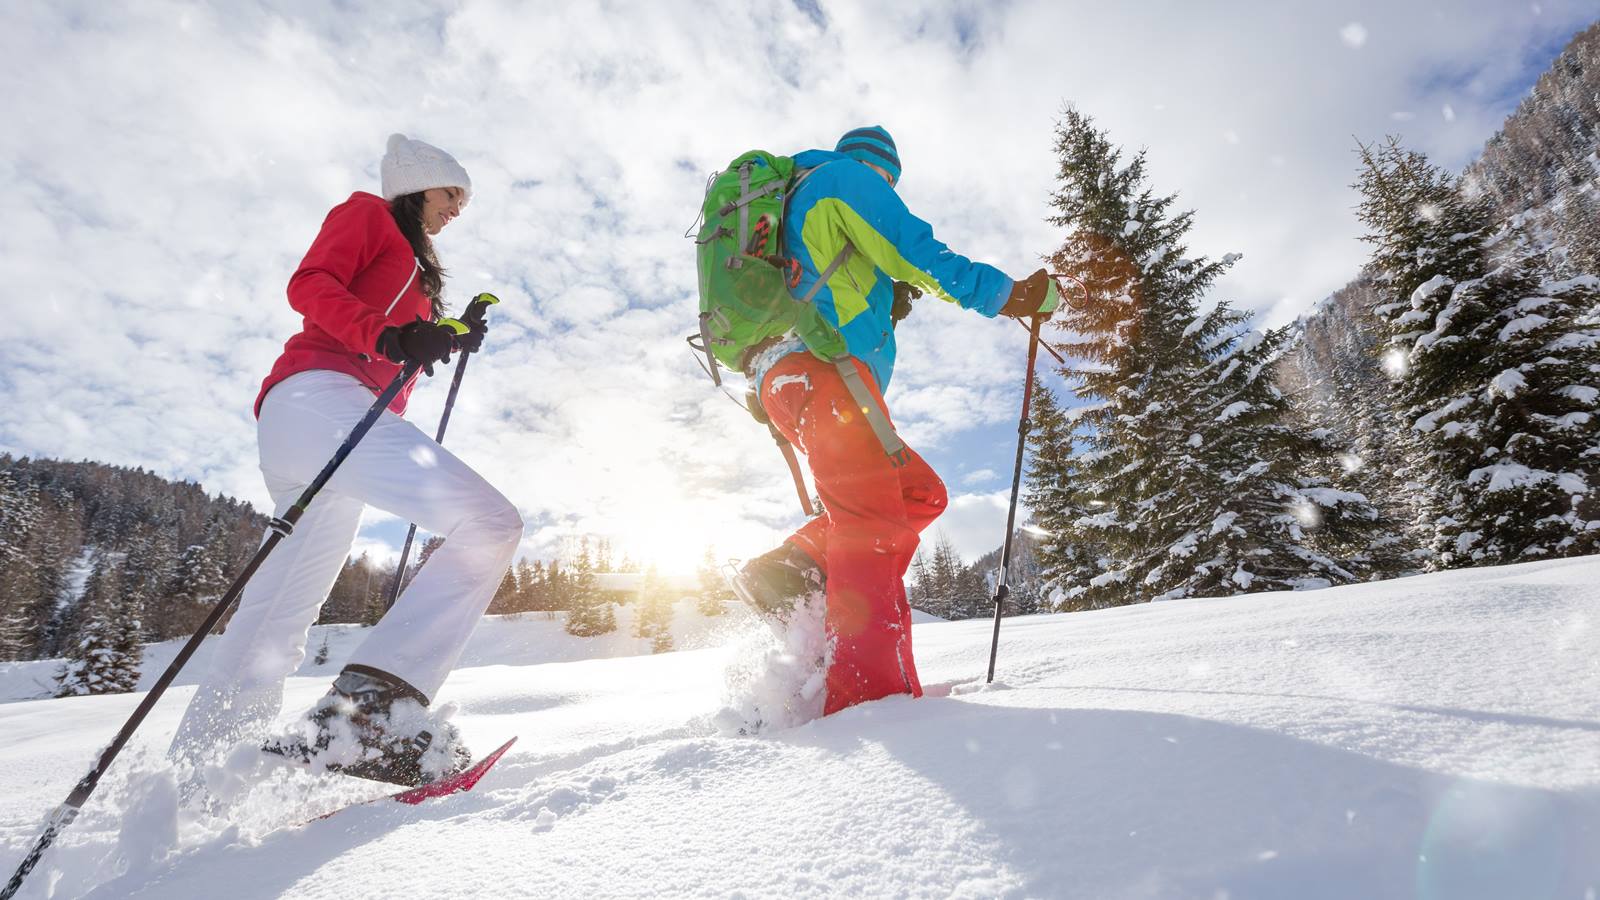  Outdoor winter activities you can safely enjoy this season